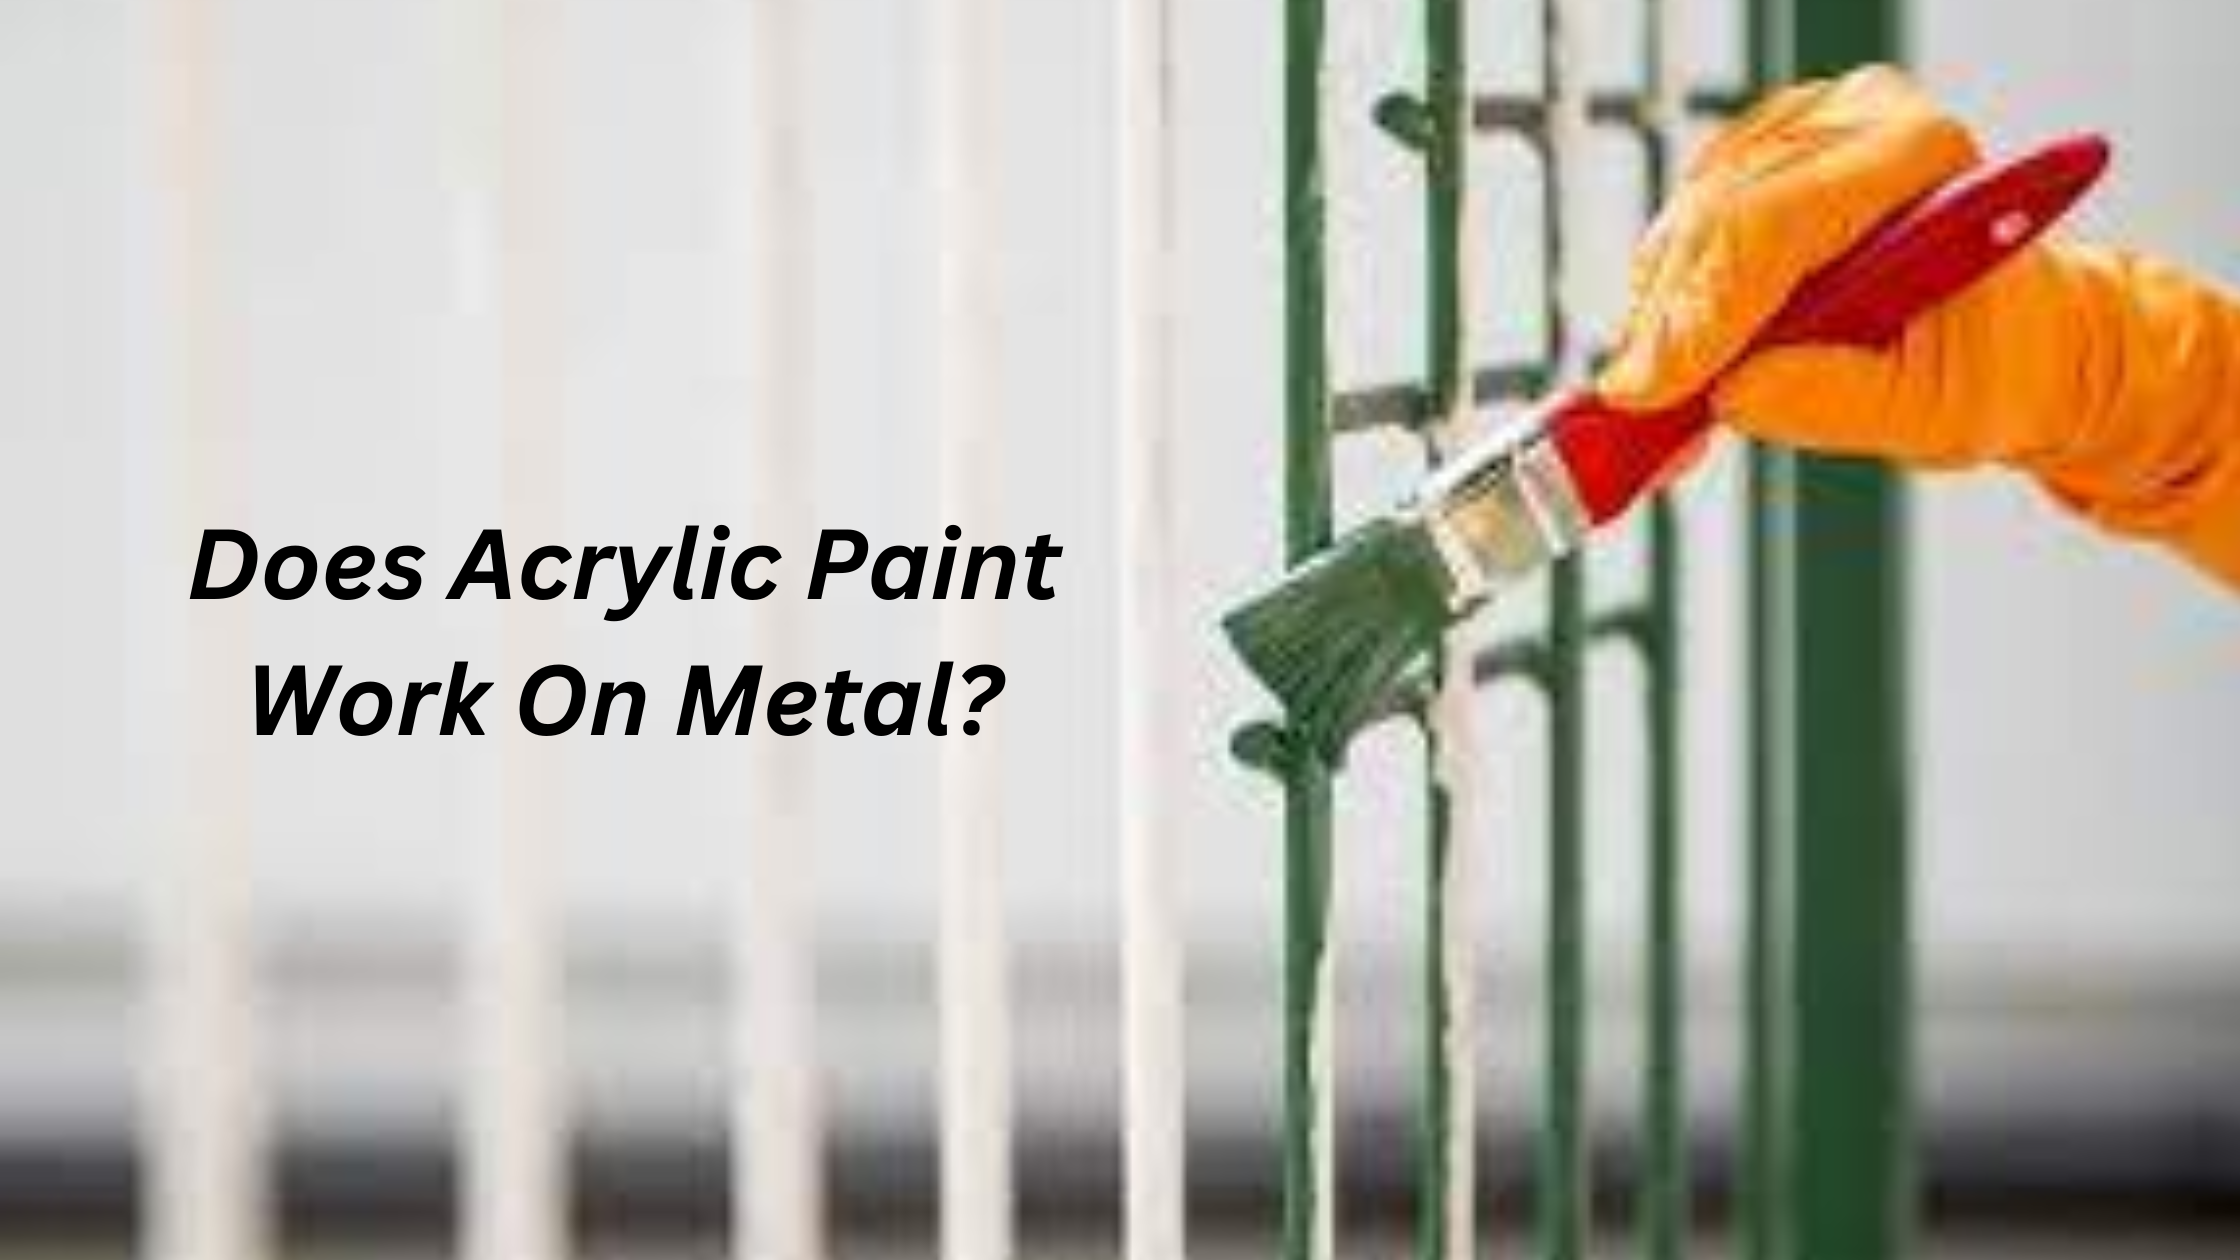 Does Acrylic Paint Work On Metal?